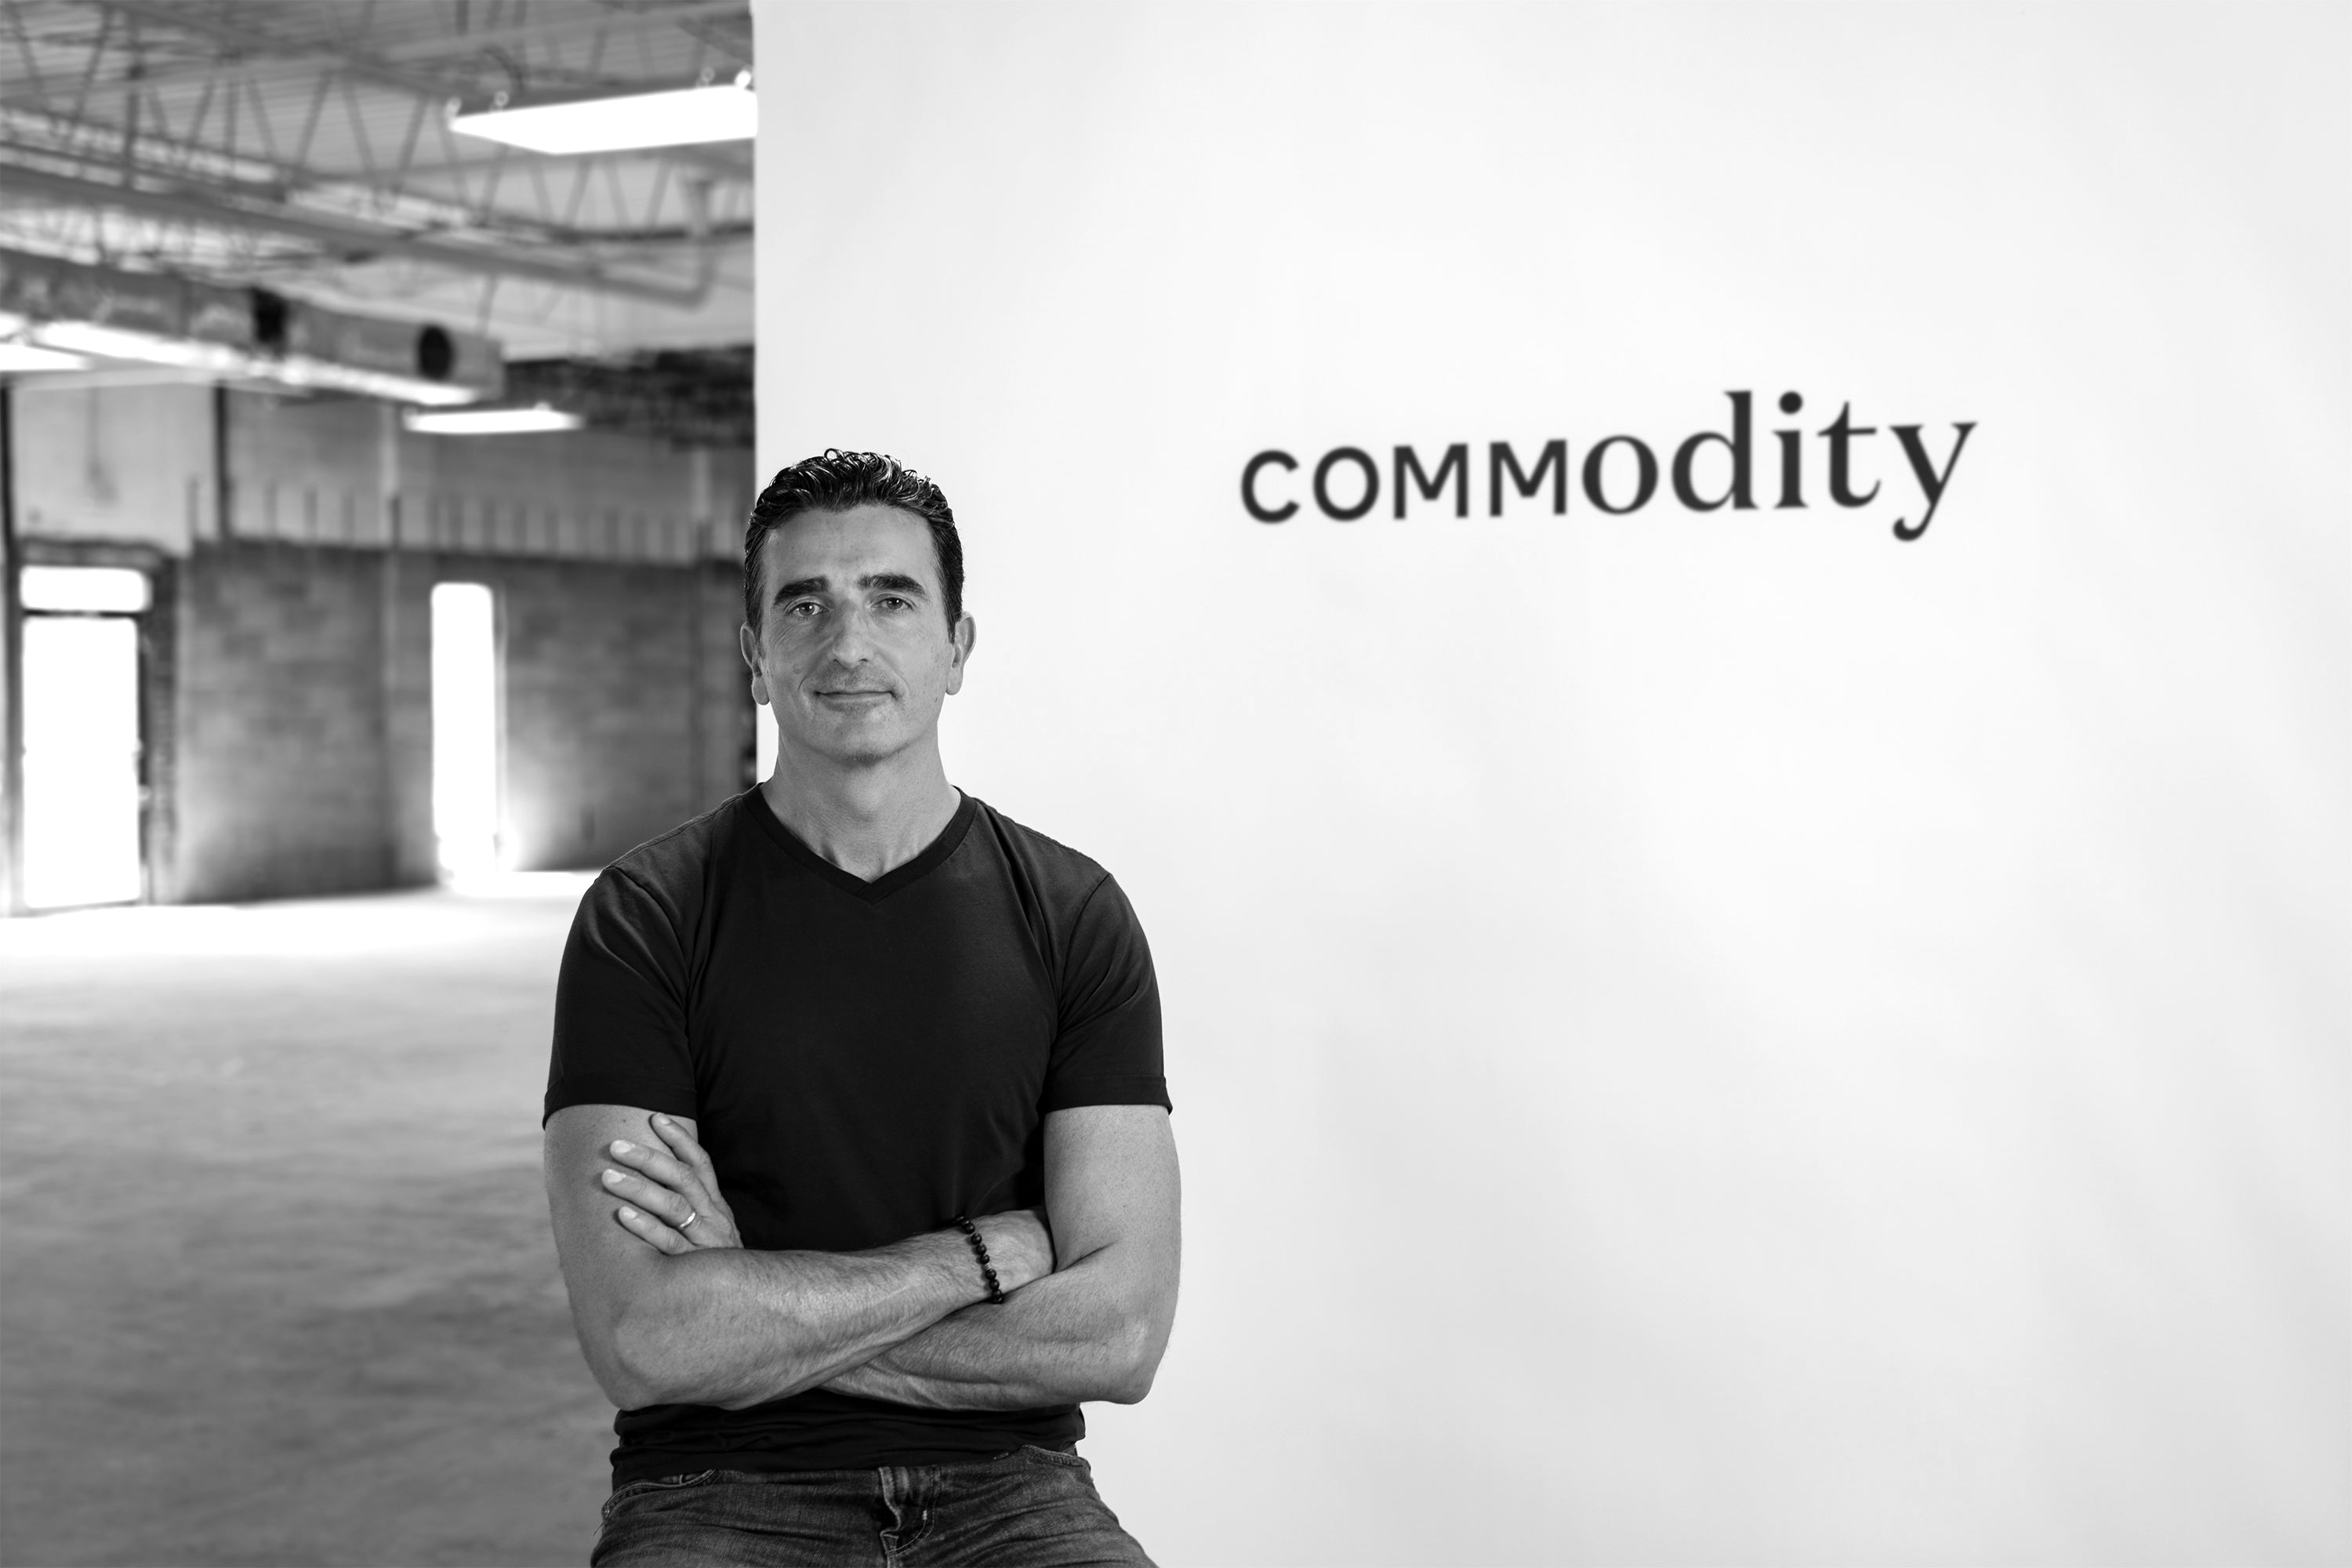 Vicken Arslanian in front of Commodity logo